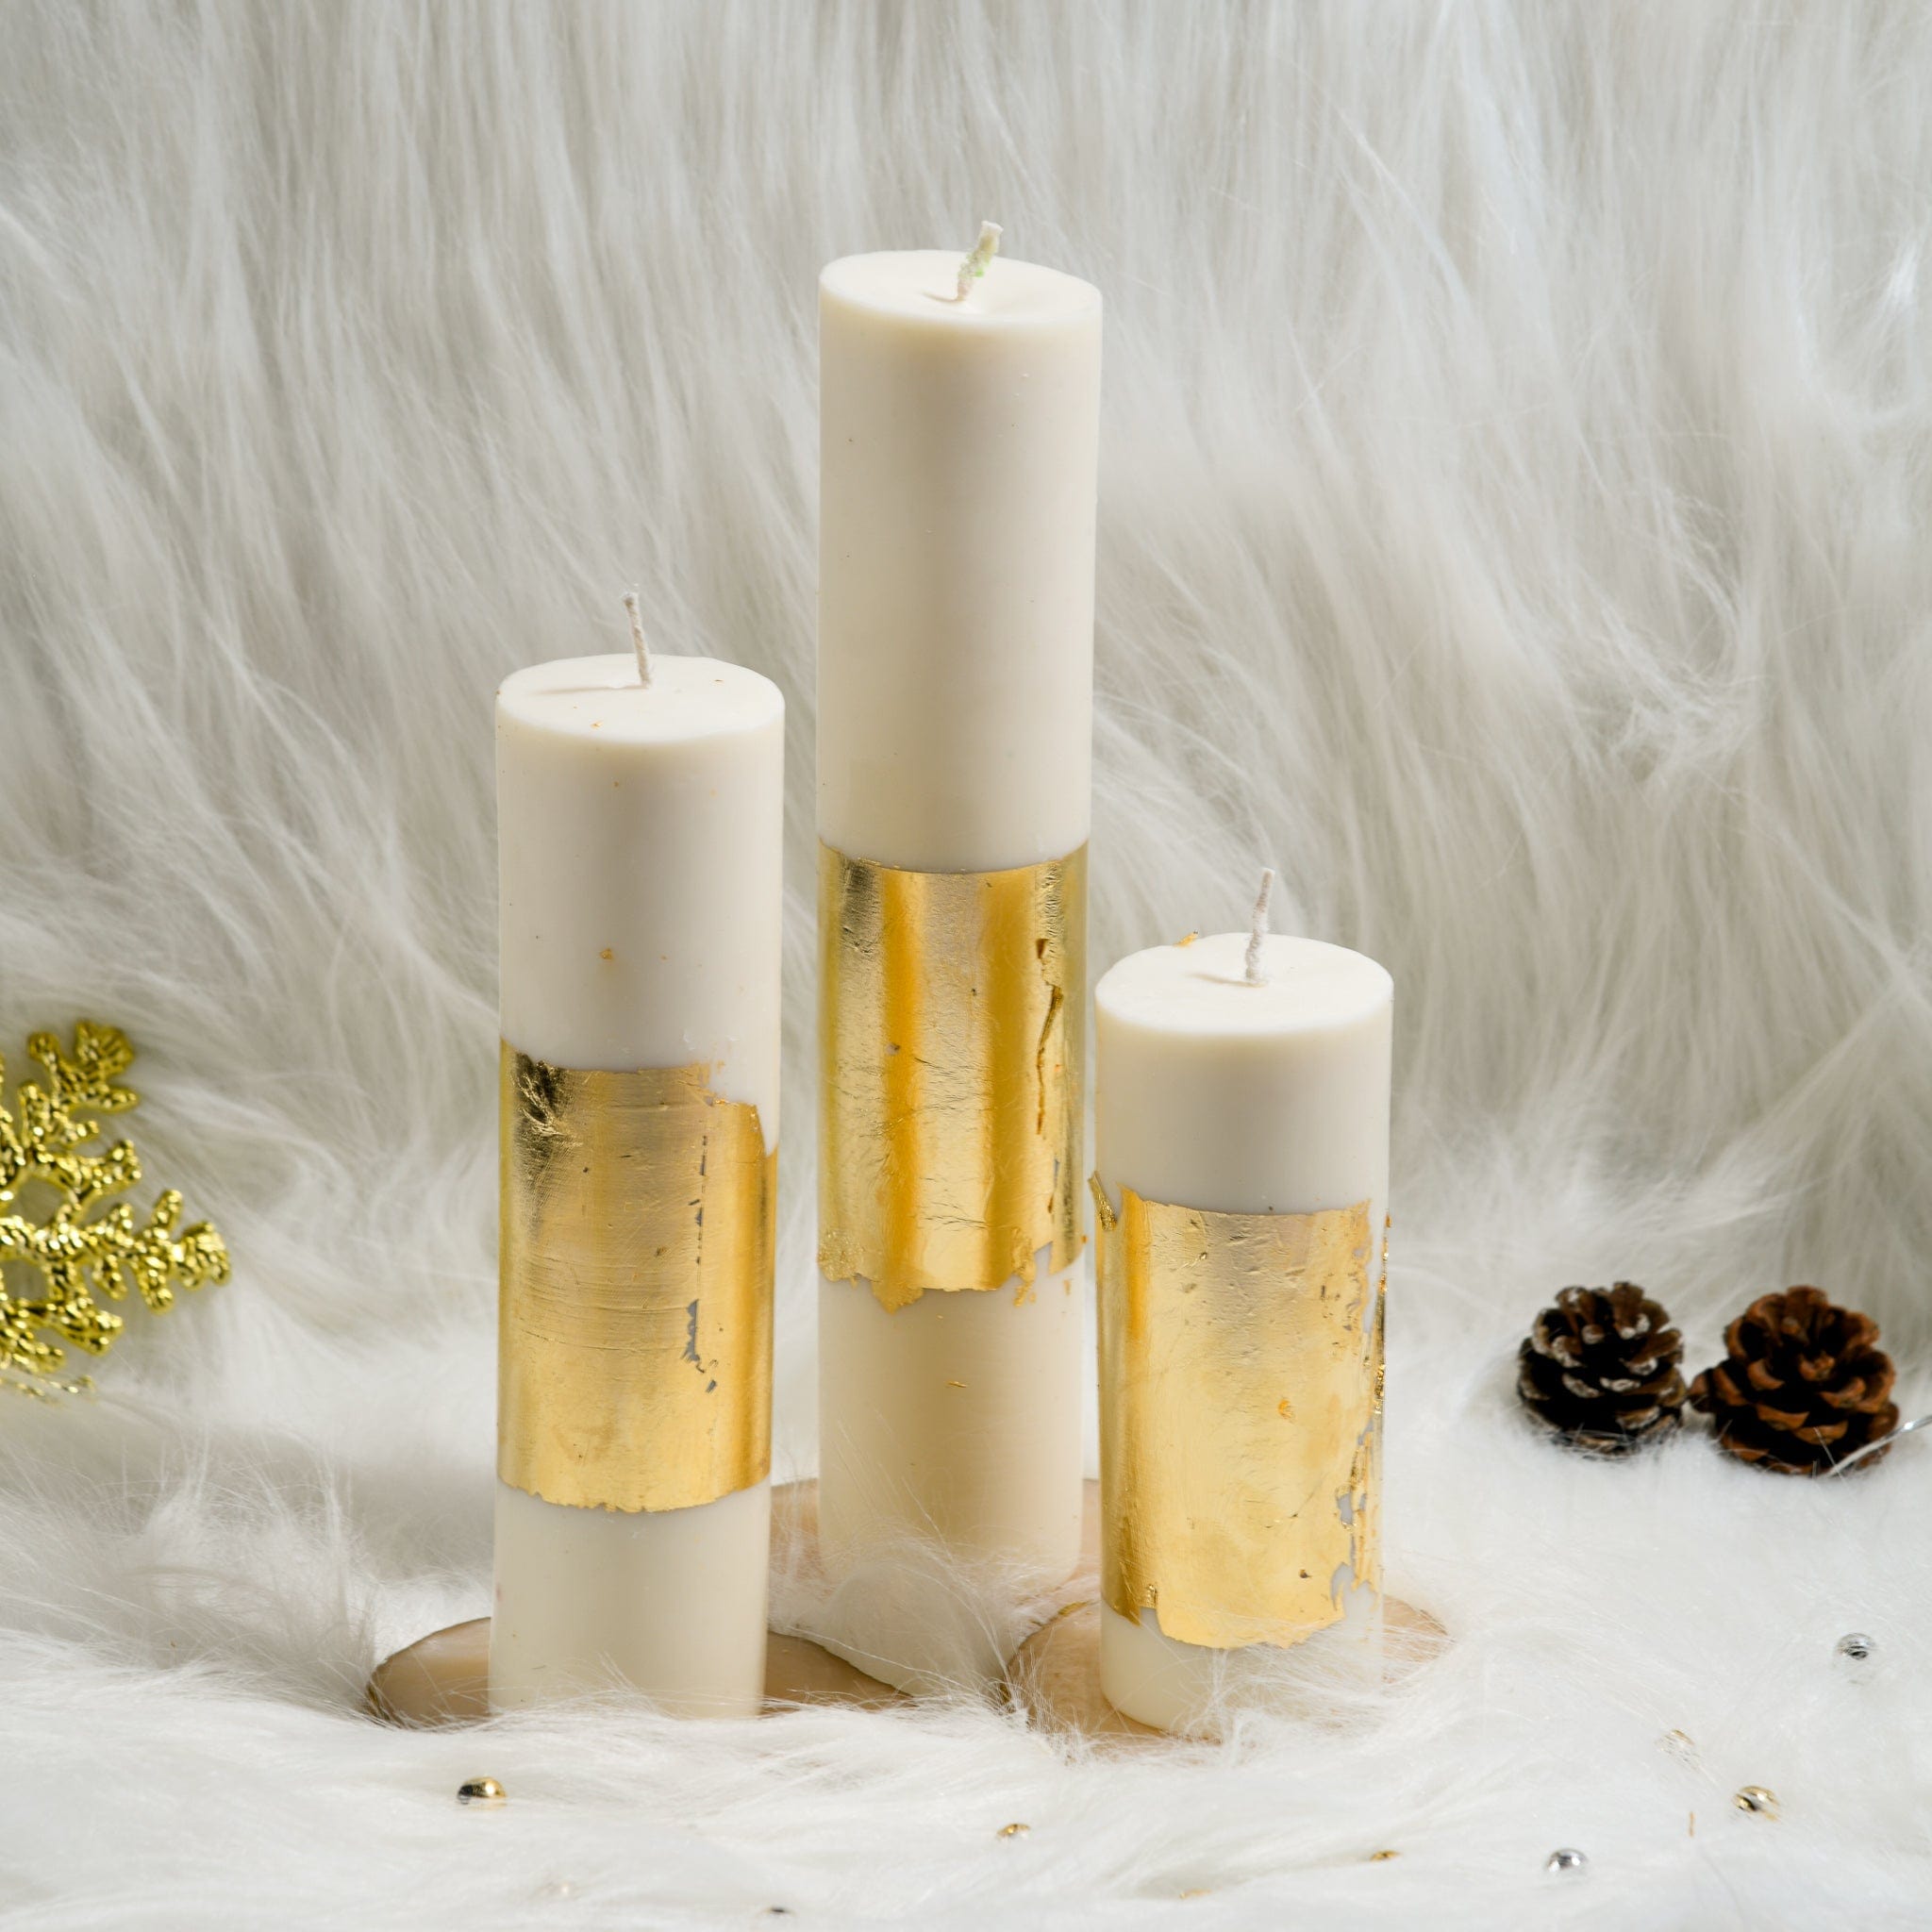 Peace - Set of 3 White Gold Pillar Candles - Cinnamon Roll Scented